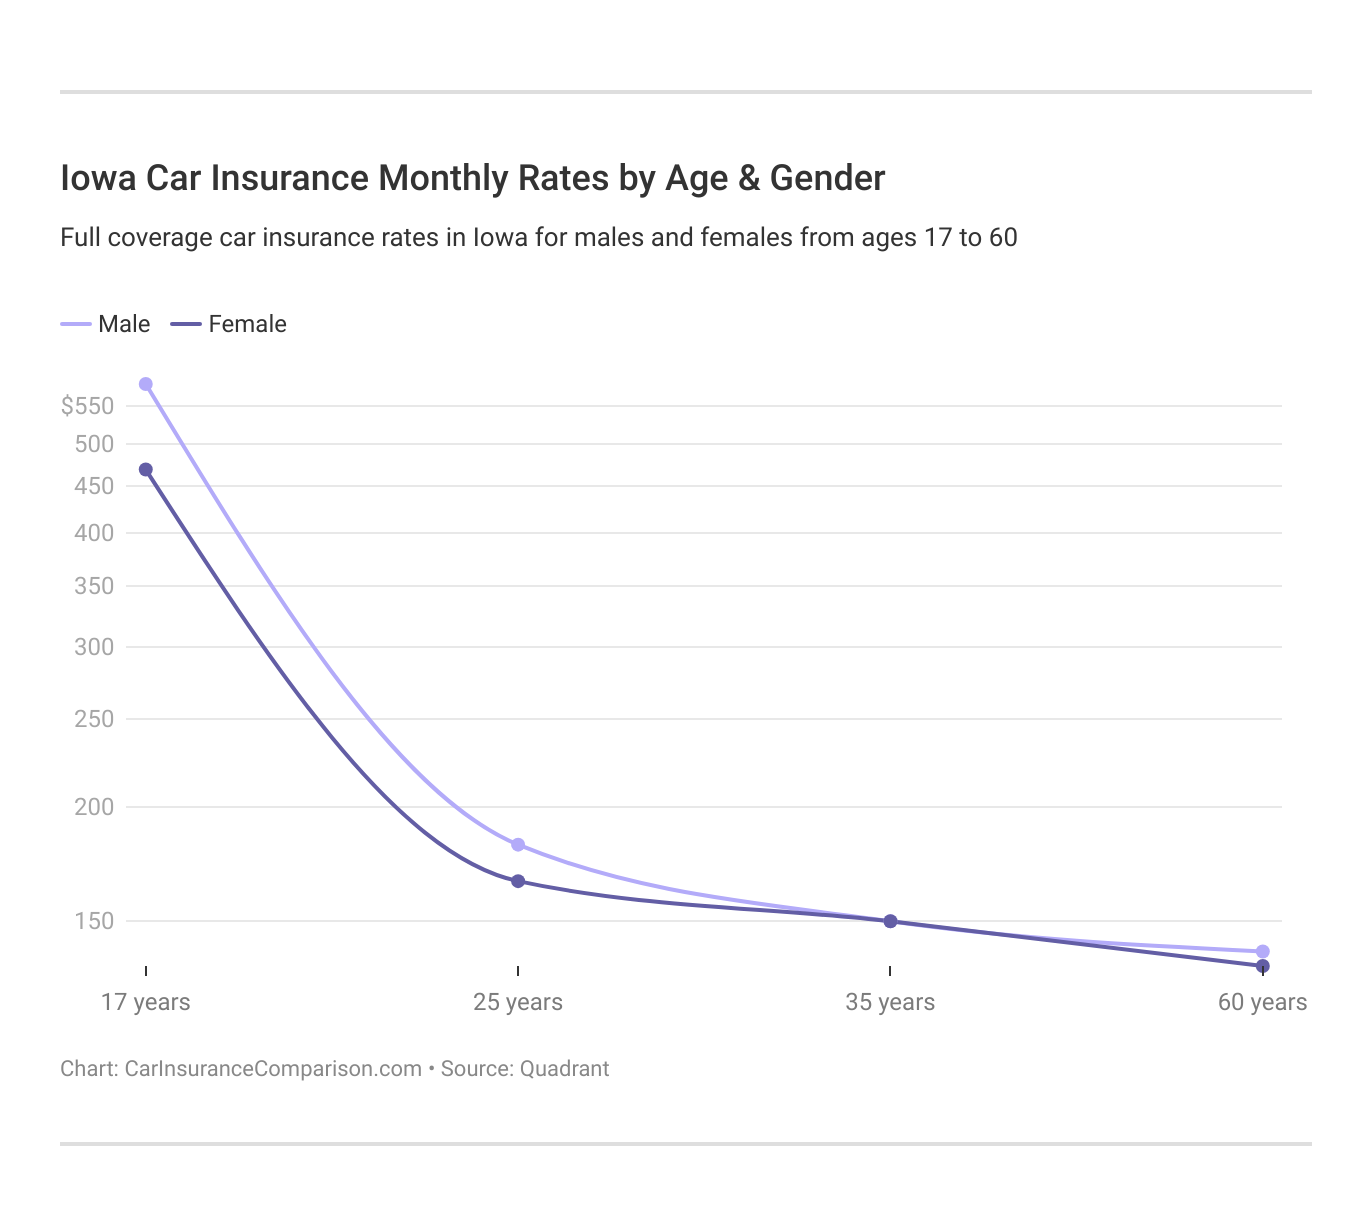 Iowa Car Insurance Monthly Rates by Age & Gender